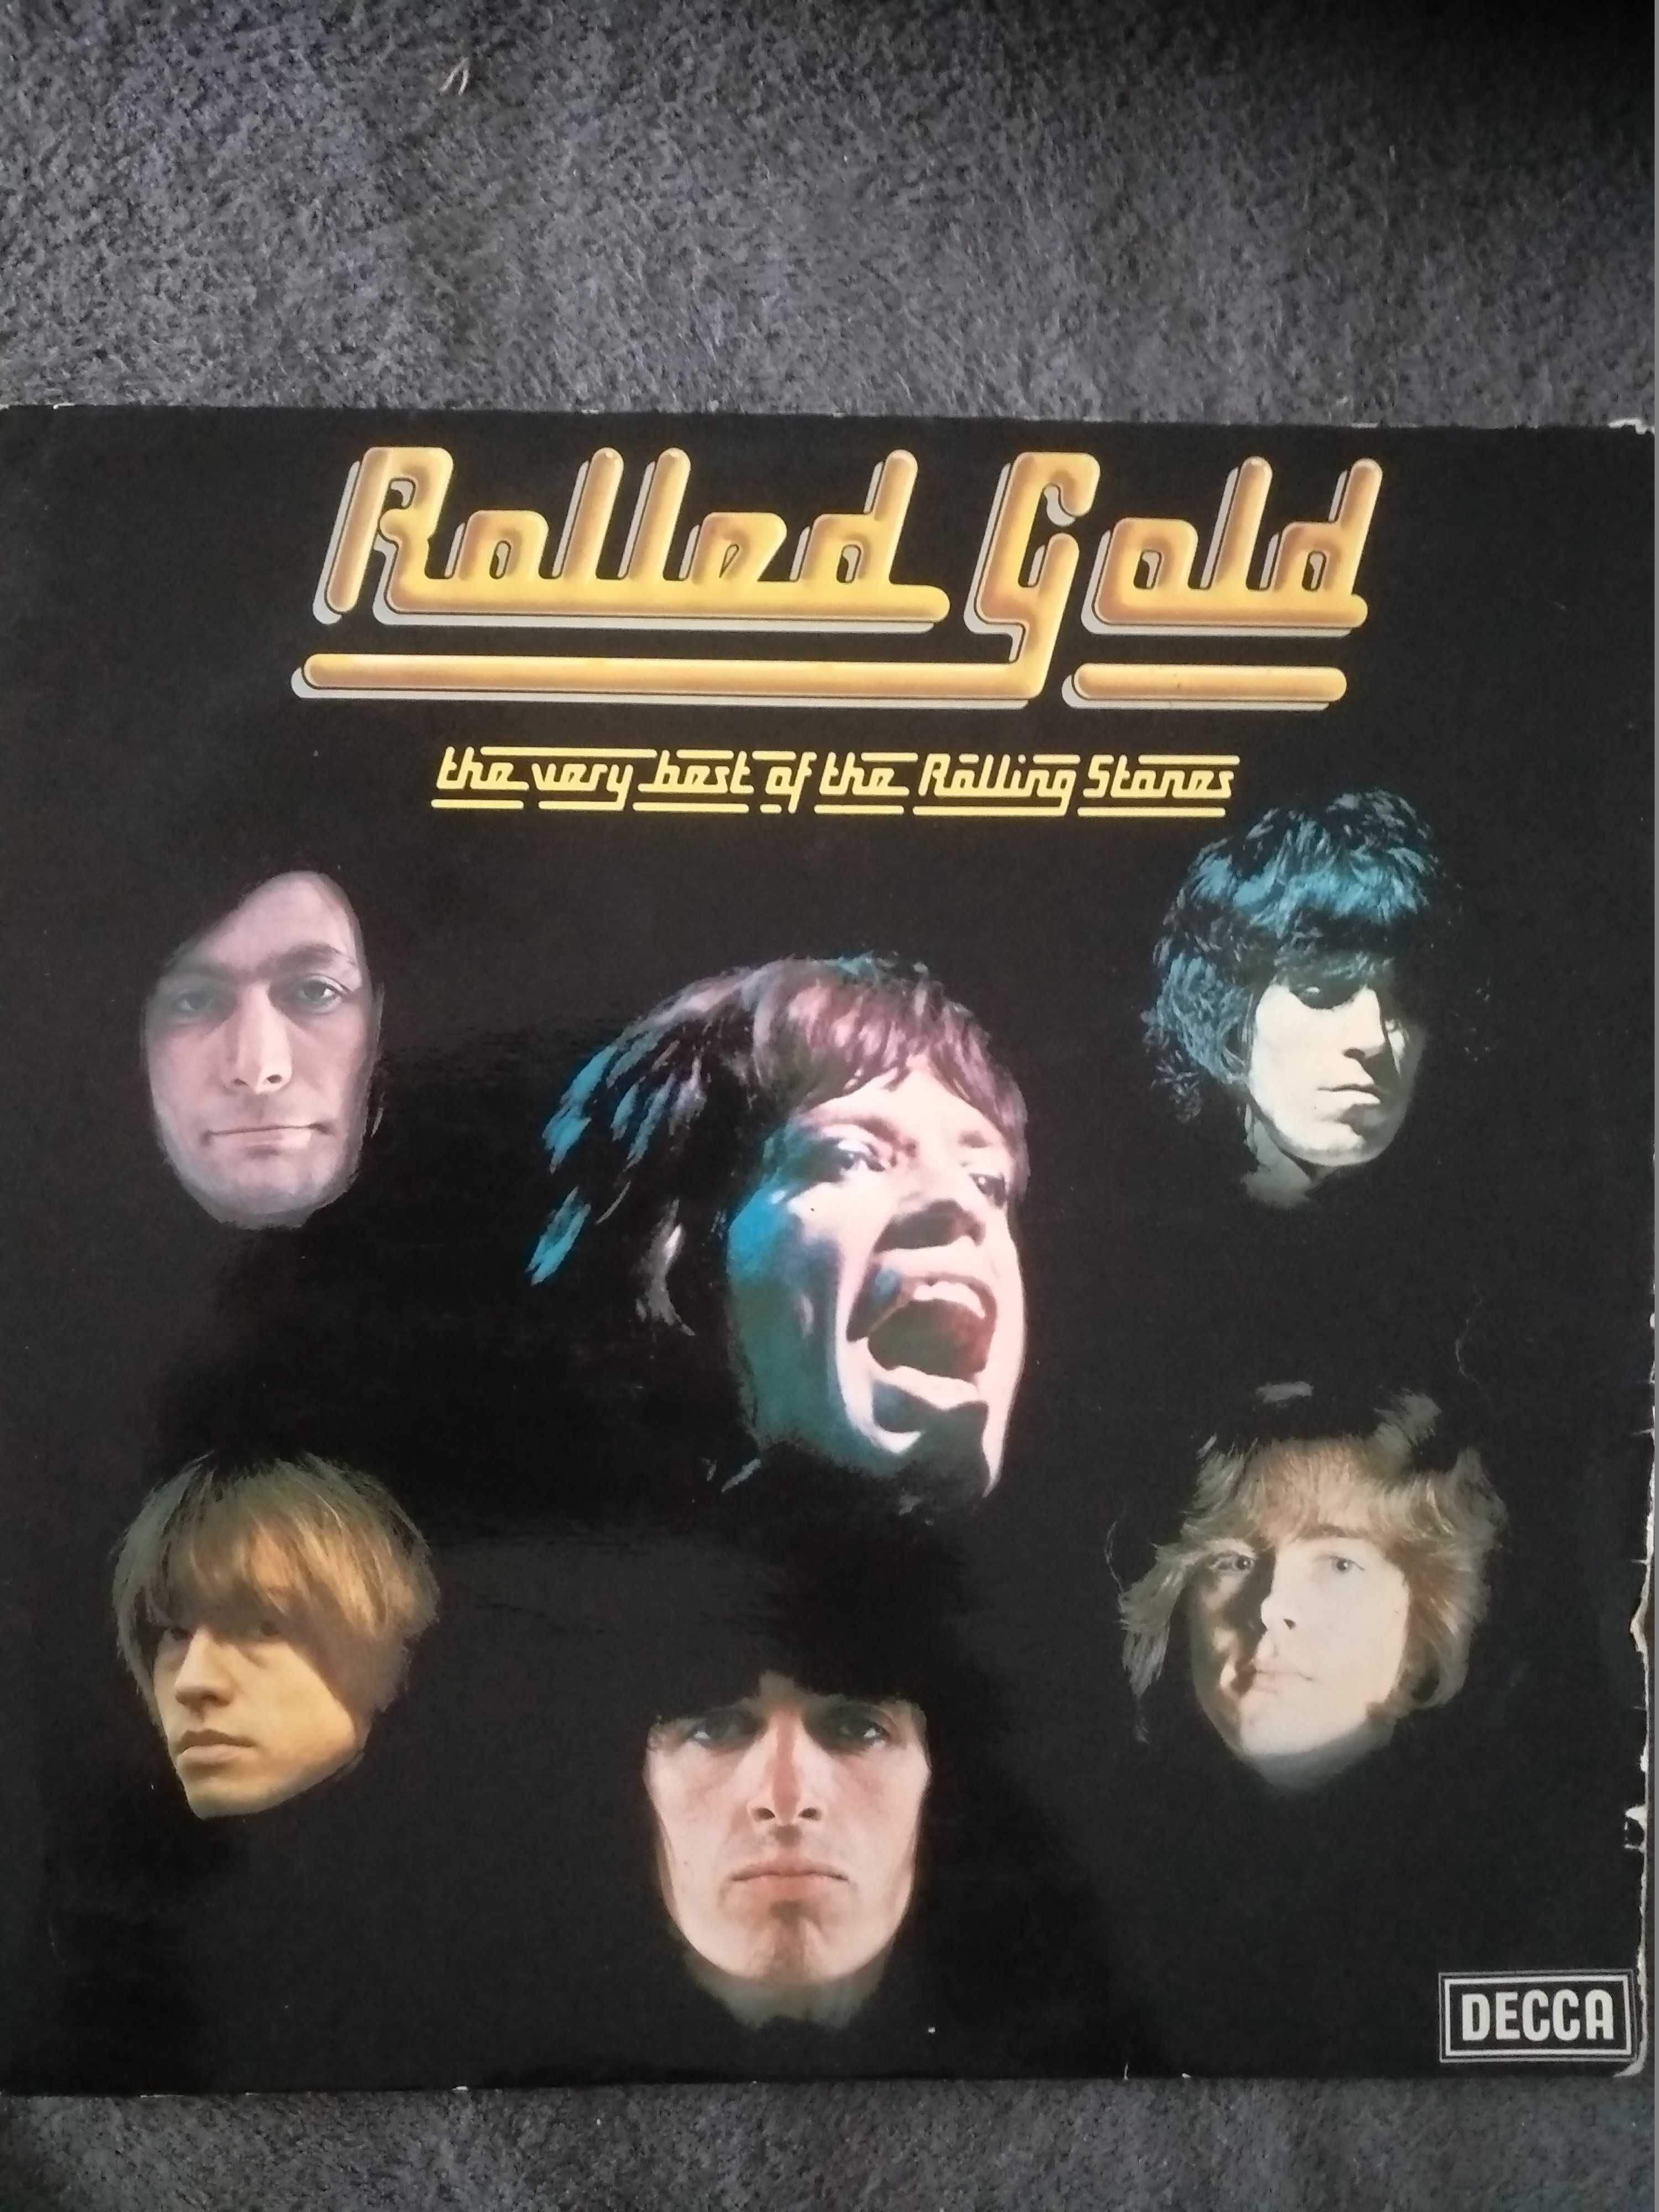 The Rolling Stones – Rolled Gold - The Very Best Of 1 press belgium